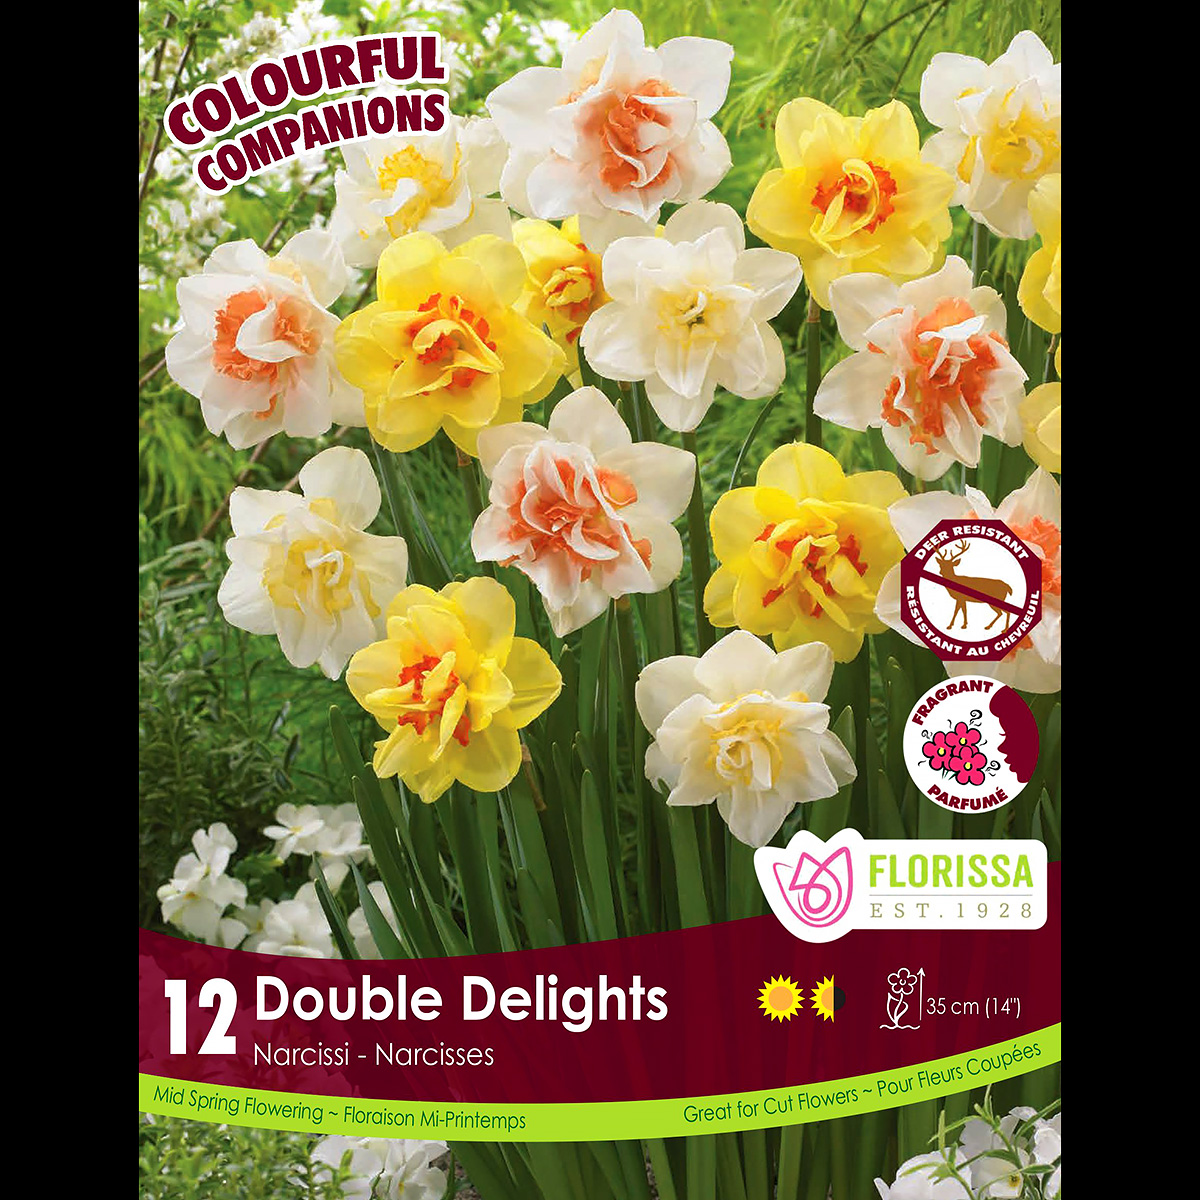 Colorful Companions Narcissus 'Double Delights' 12PK 